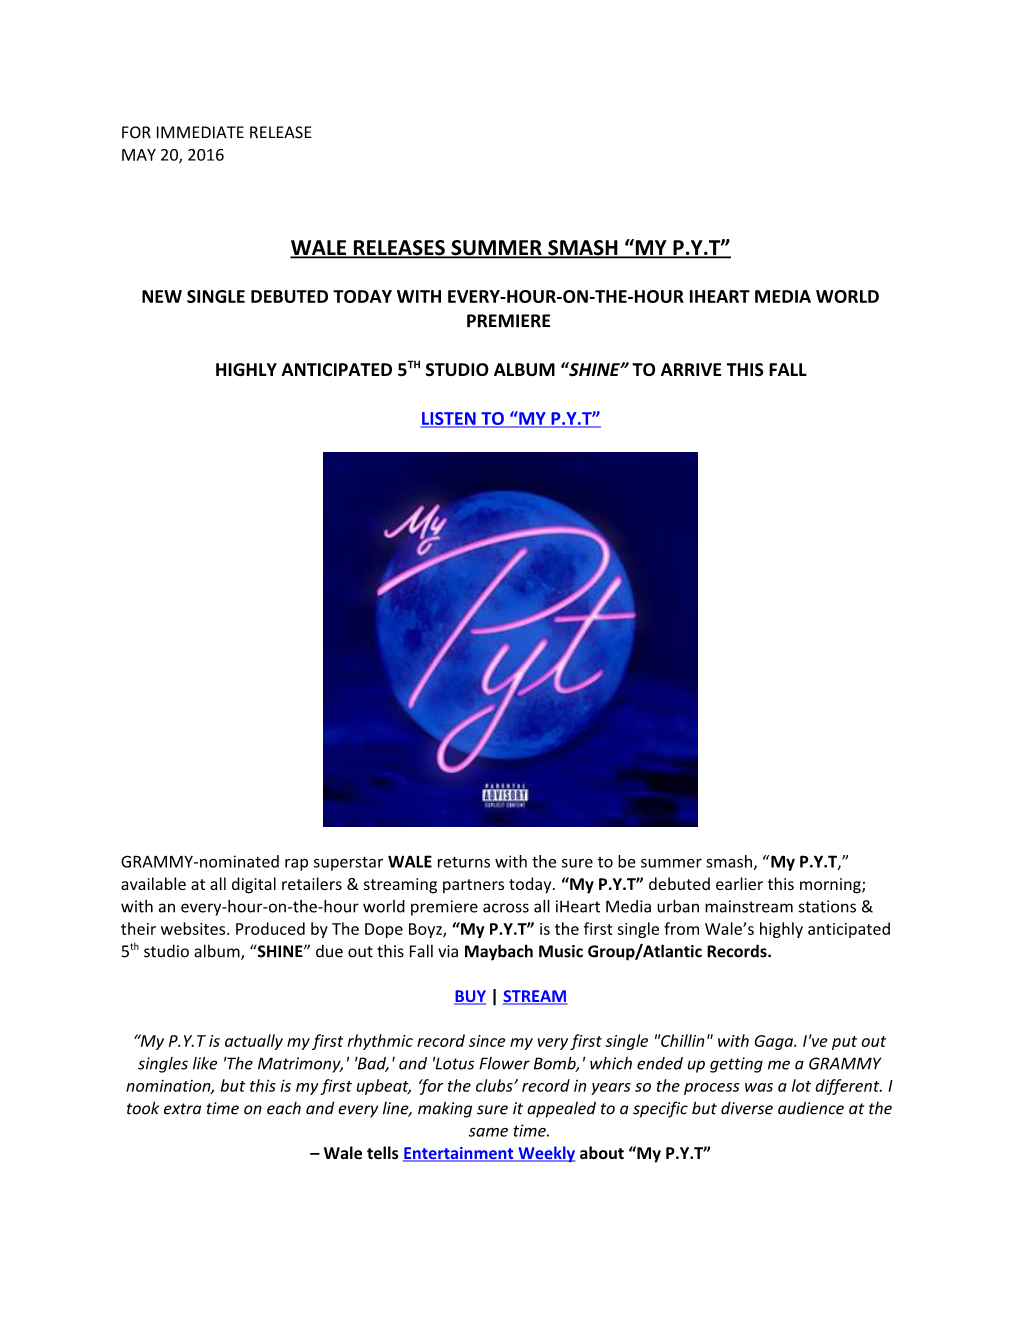 Wale Releases Summer Smash My P.Y.T